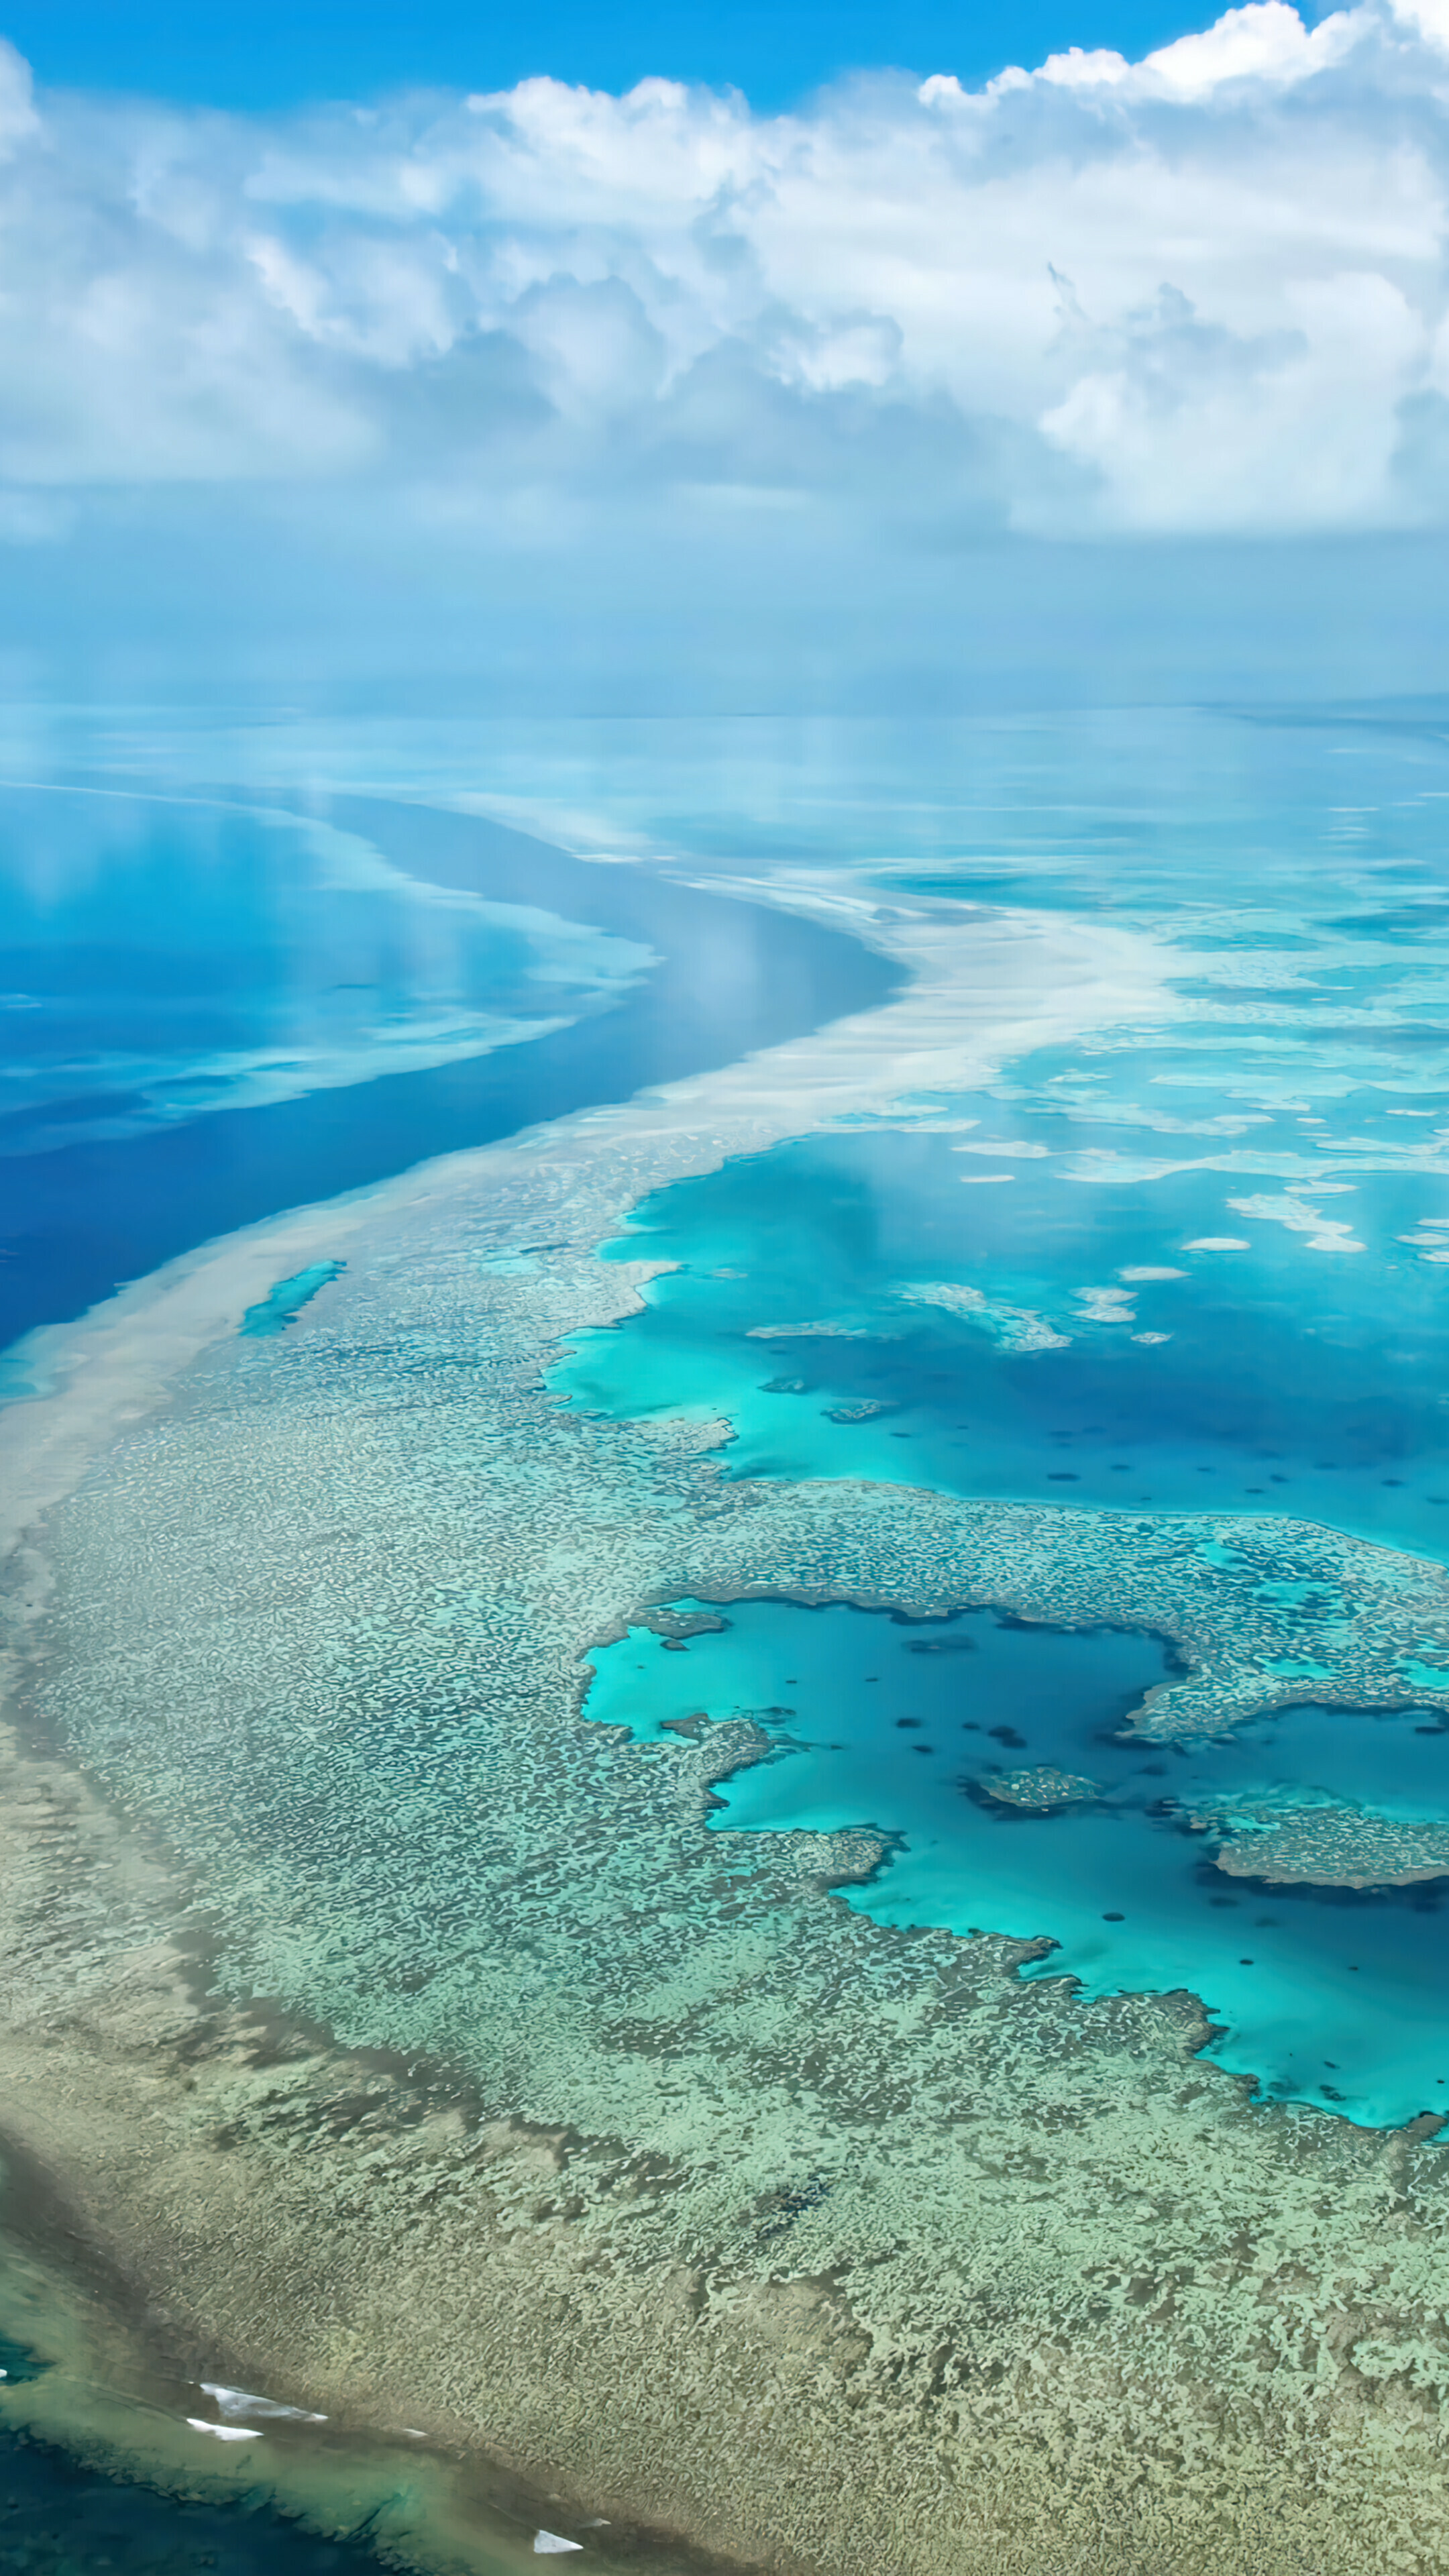 Great Barrier Reef: A complex of coral reefs, shoals, and islets in the Pacific Ocean off the northeastern coast of Australia. 2160x3840 4K Wallpaper.